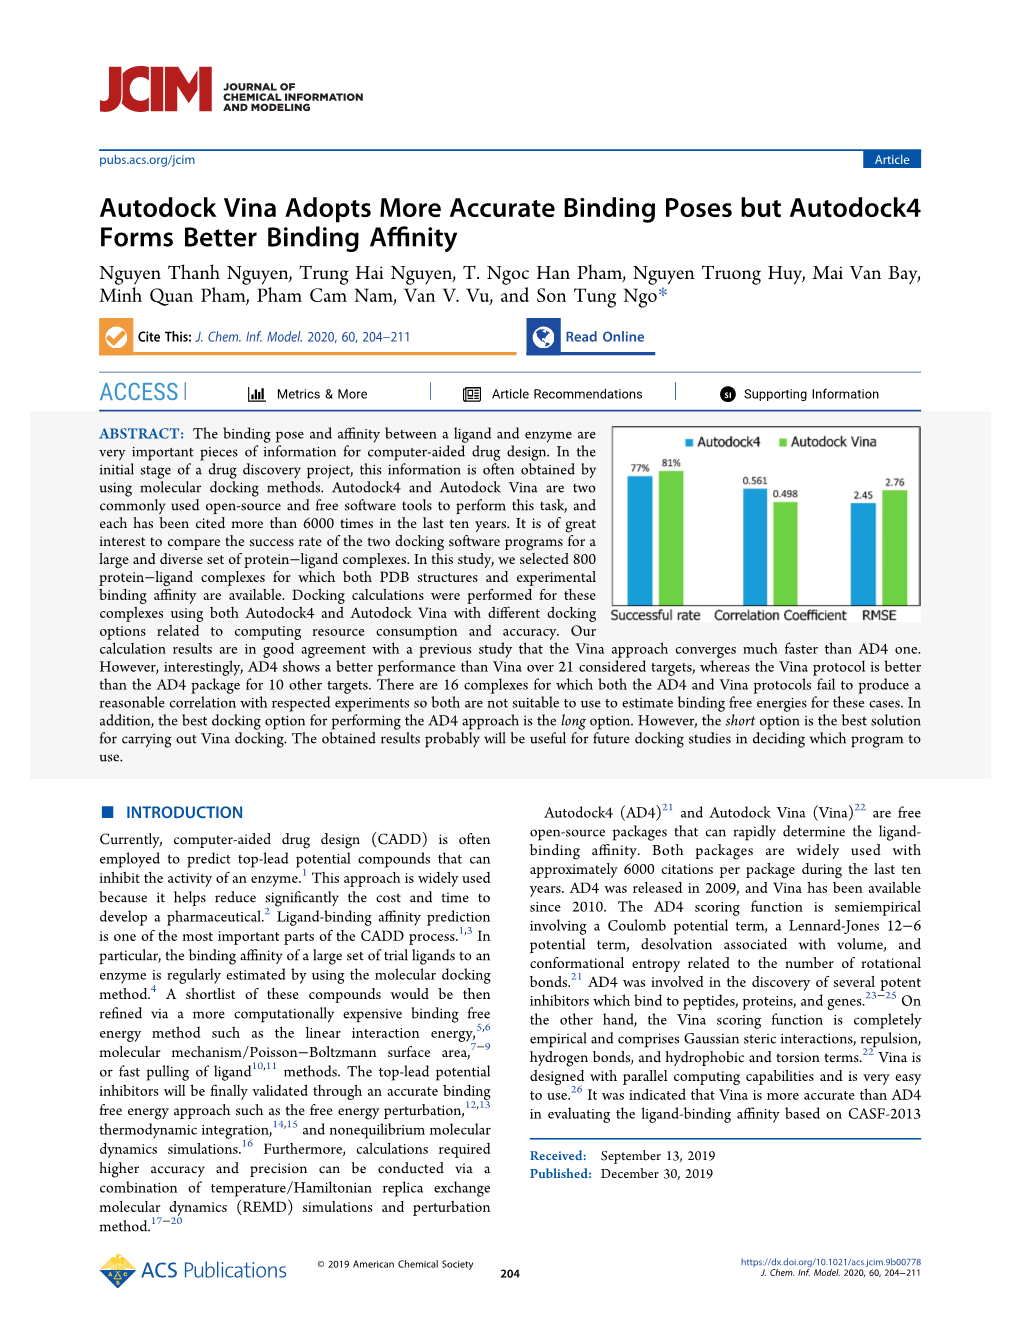 Autodock Vina Adopts More Accurate Binding Poses but Autodock4 Forms Better Binding Aﬃnity Nguyen Thanh Nguyen, Trung Hai Nguyen, T